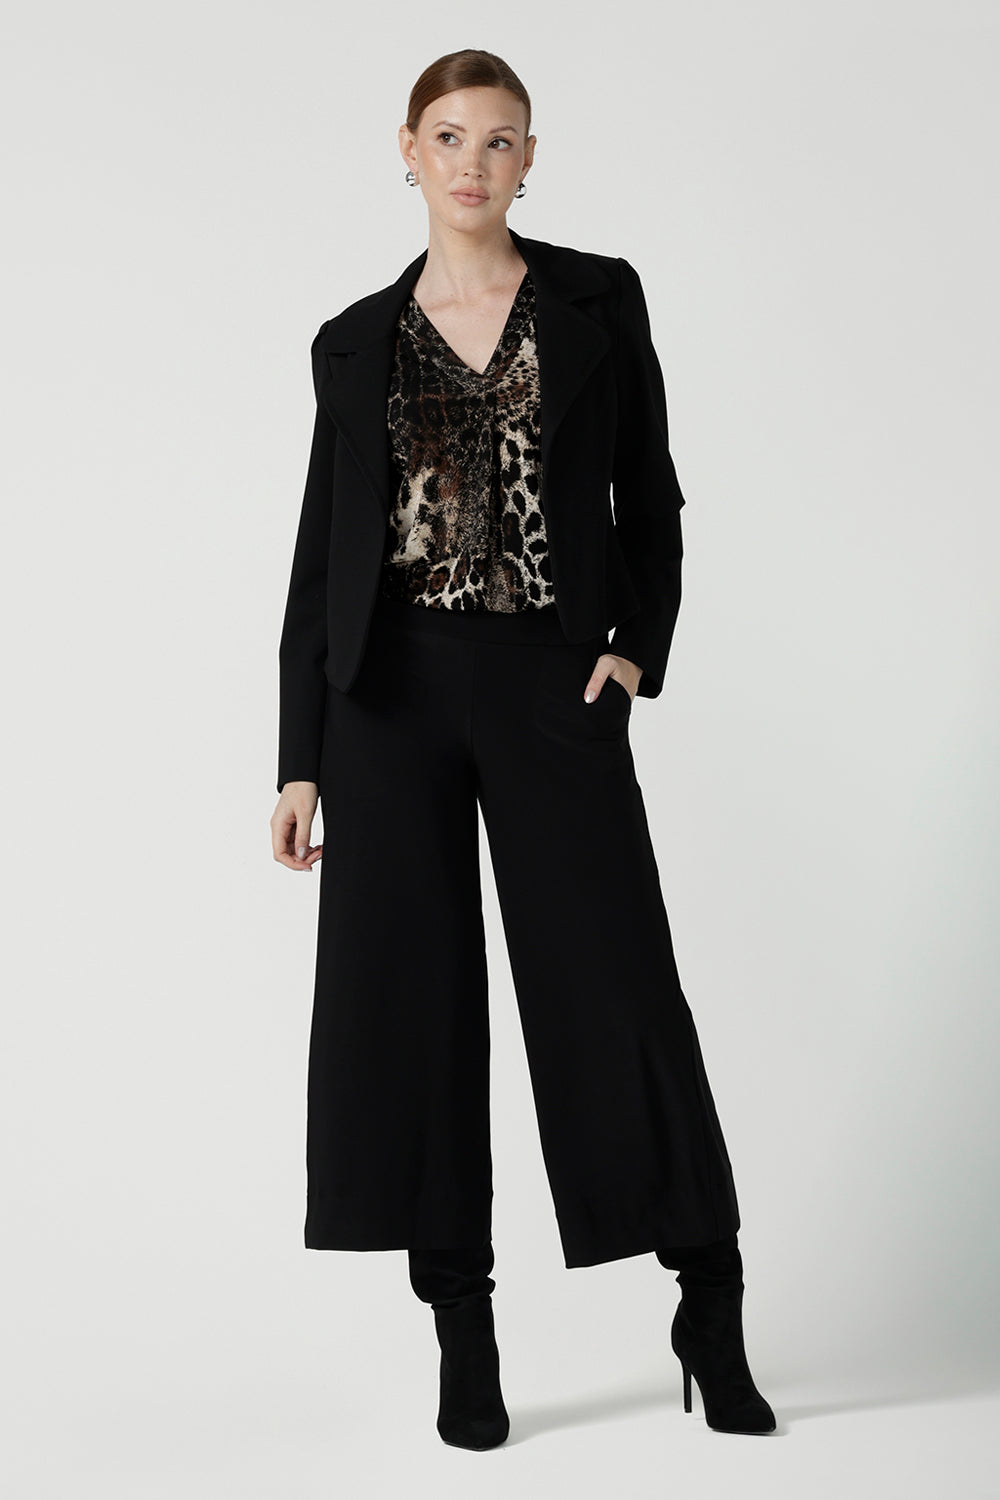 A size 10 woman wears the Jaime Top in Panthera, a jersey animal print top perfect for work to weekend. A v-neck top with 3/4 sleeves. Made in Australia for petite to plus size women size 8 - 24. Styled back with a black jacket. 